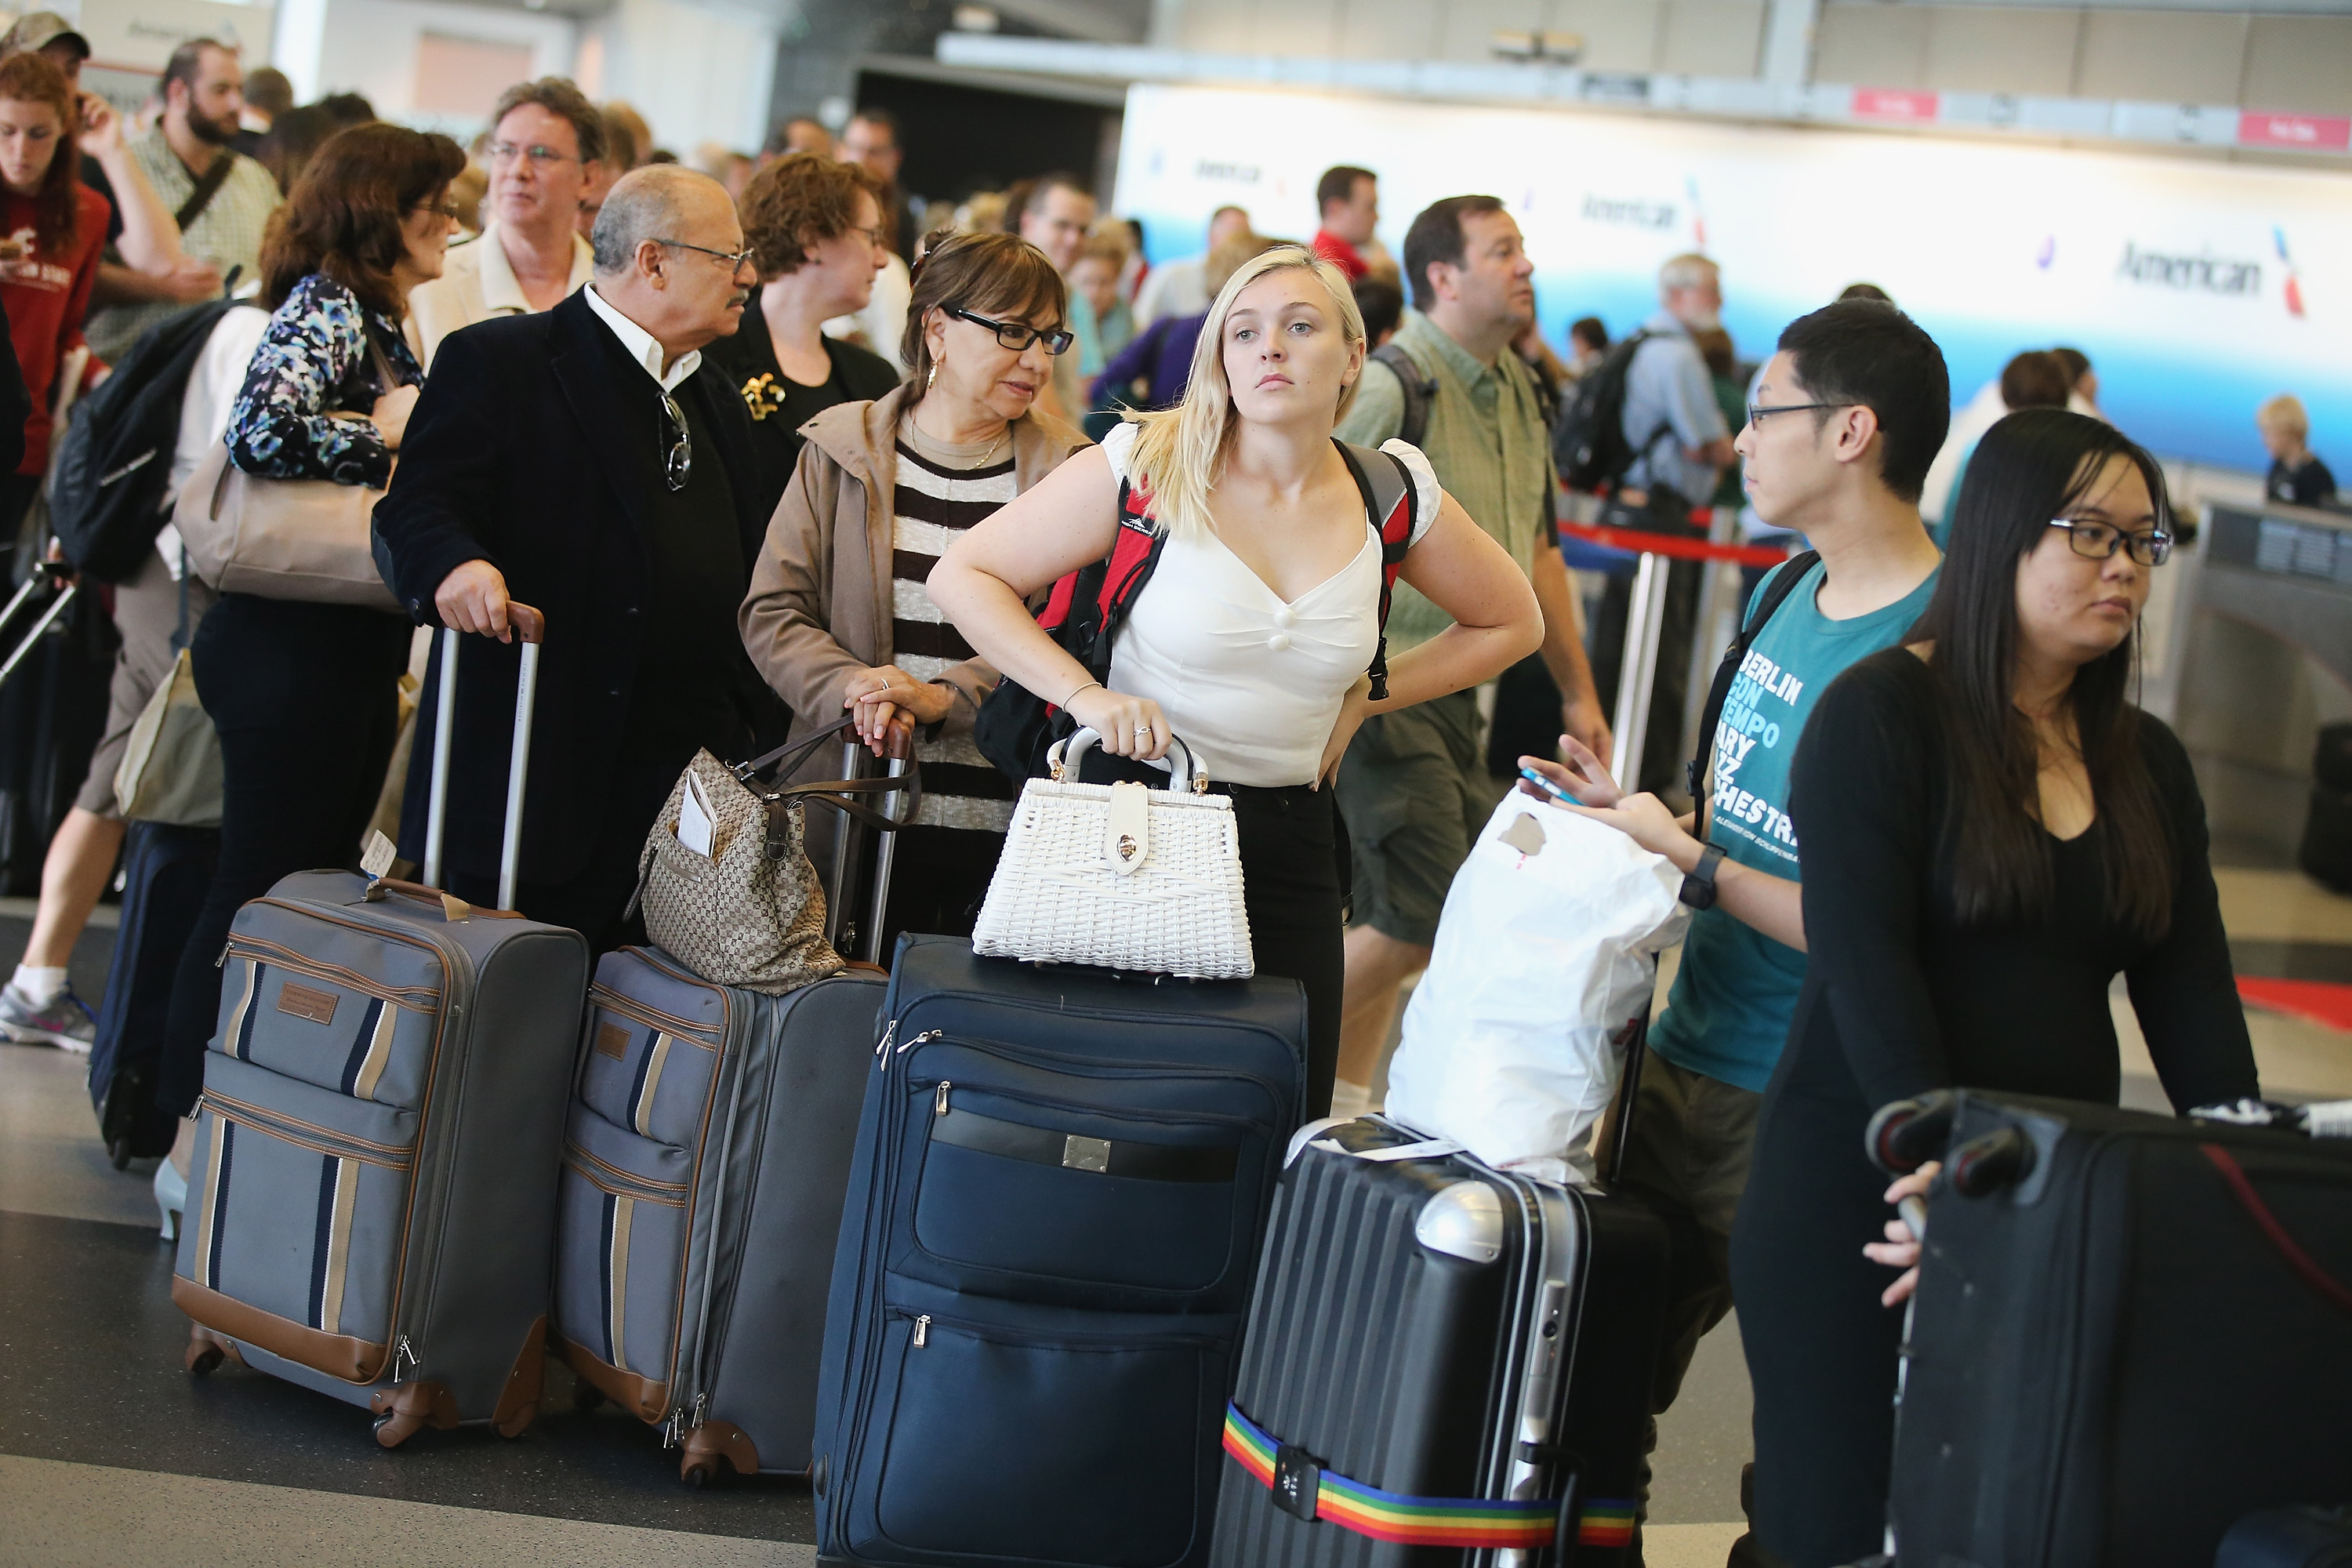 Passengers wait in line to reschedule flights at O'Hare International Airport on September 26, 2014 in Chicago, Illinois. (Scott Olson&mdash;Getty Images)